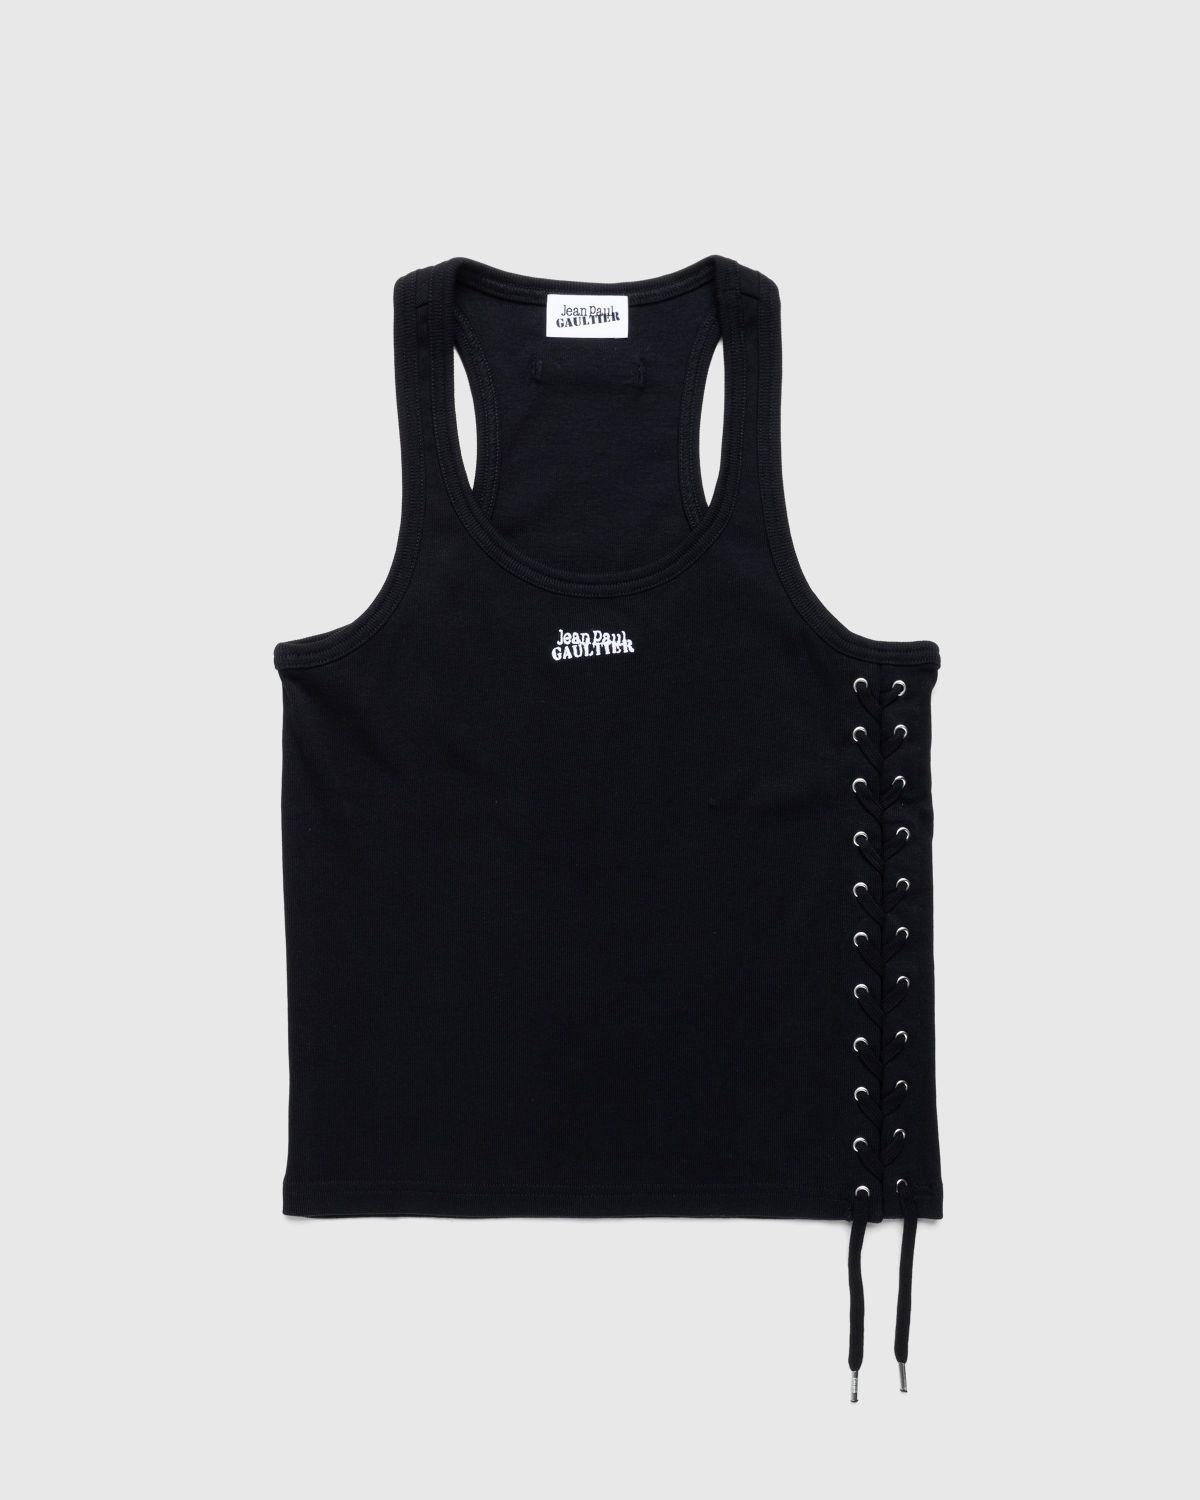 Jean Paul Gaultier – Tanktop With Laced Side Details Black - 1